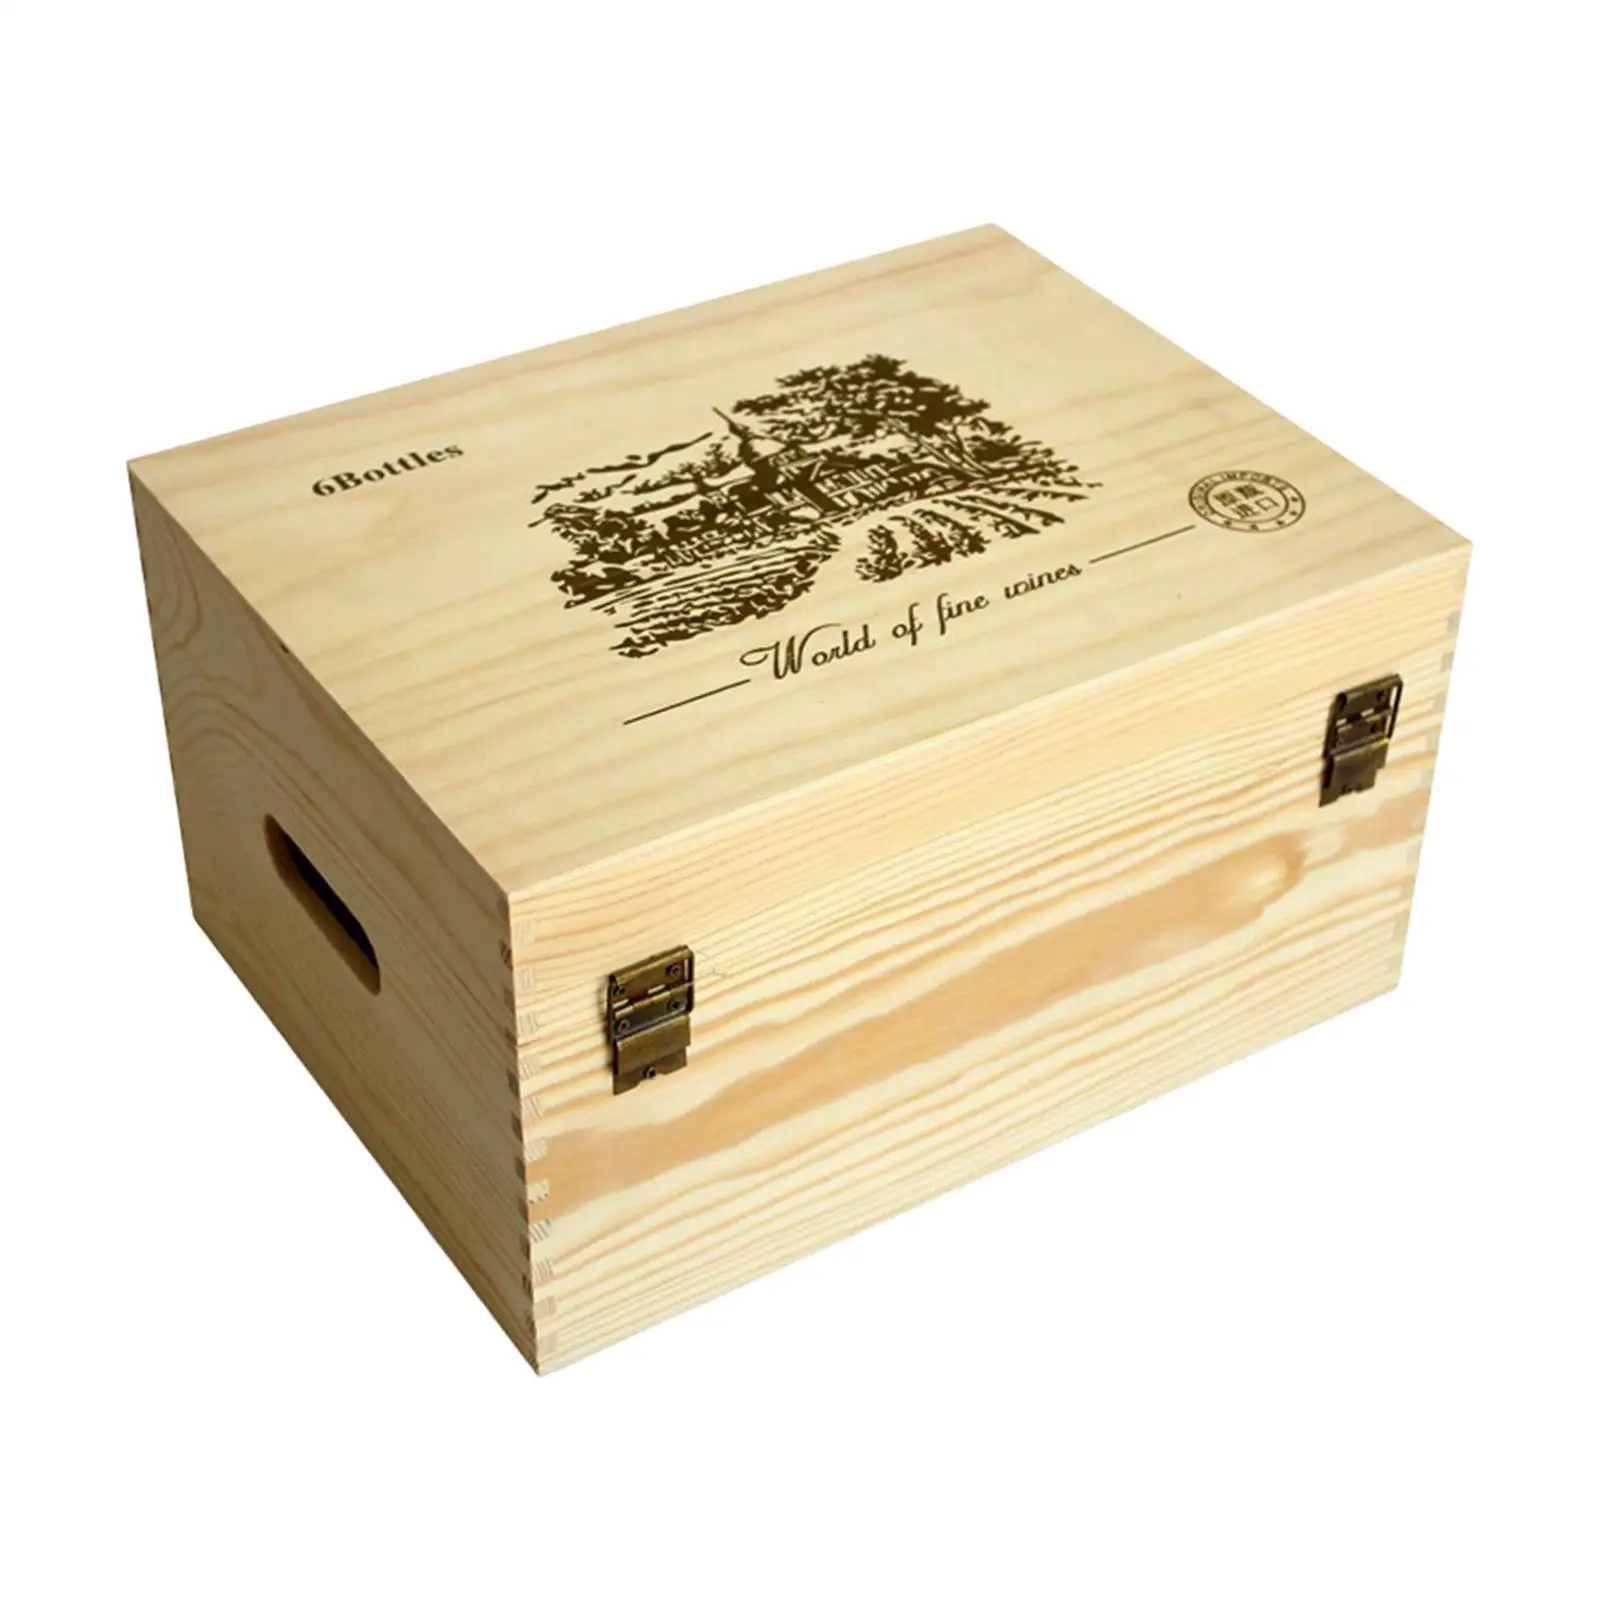 Bottle Wooden box Handle Two Bottle Gift Boxes Package Case for Wedding Birthday Party